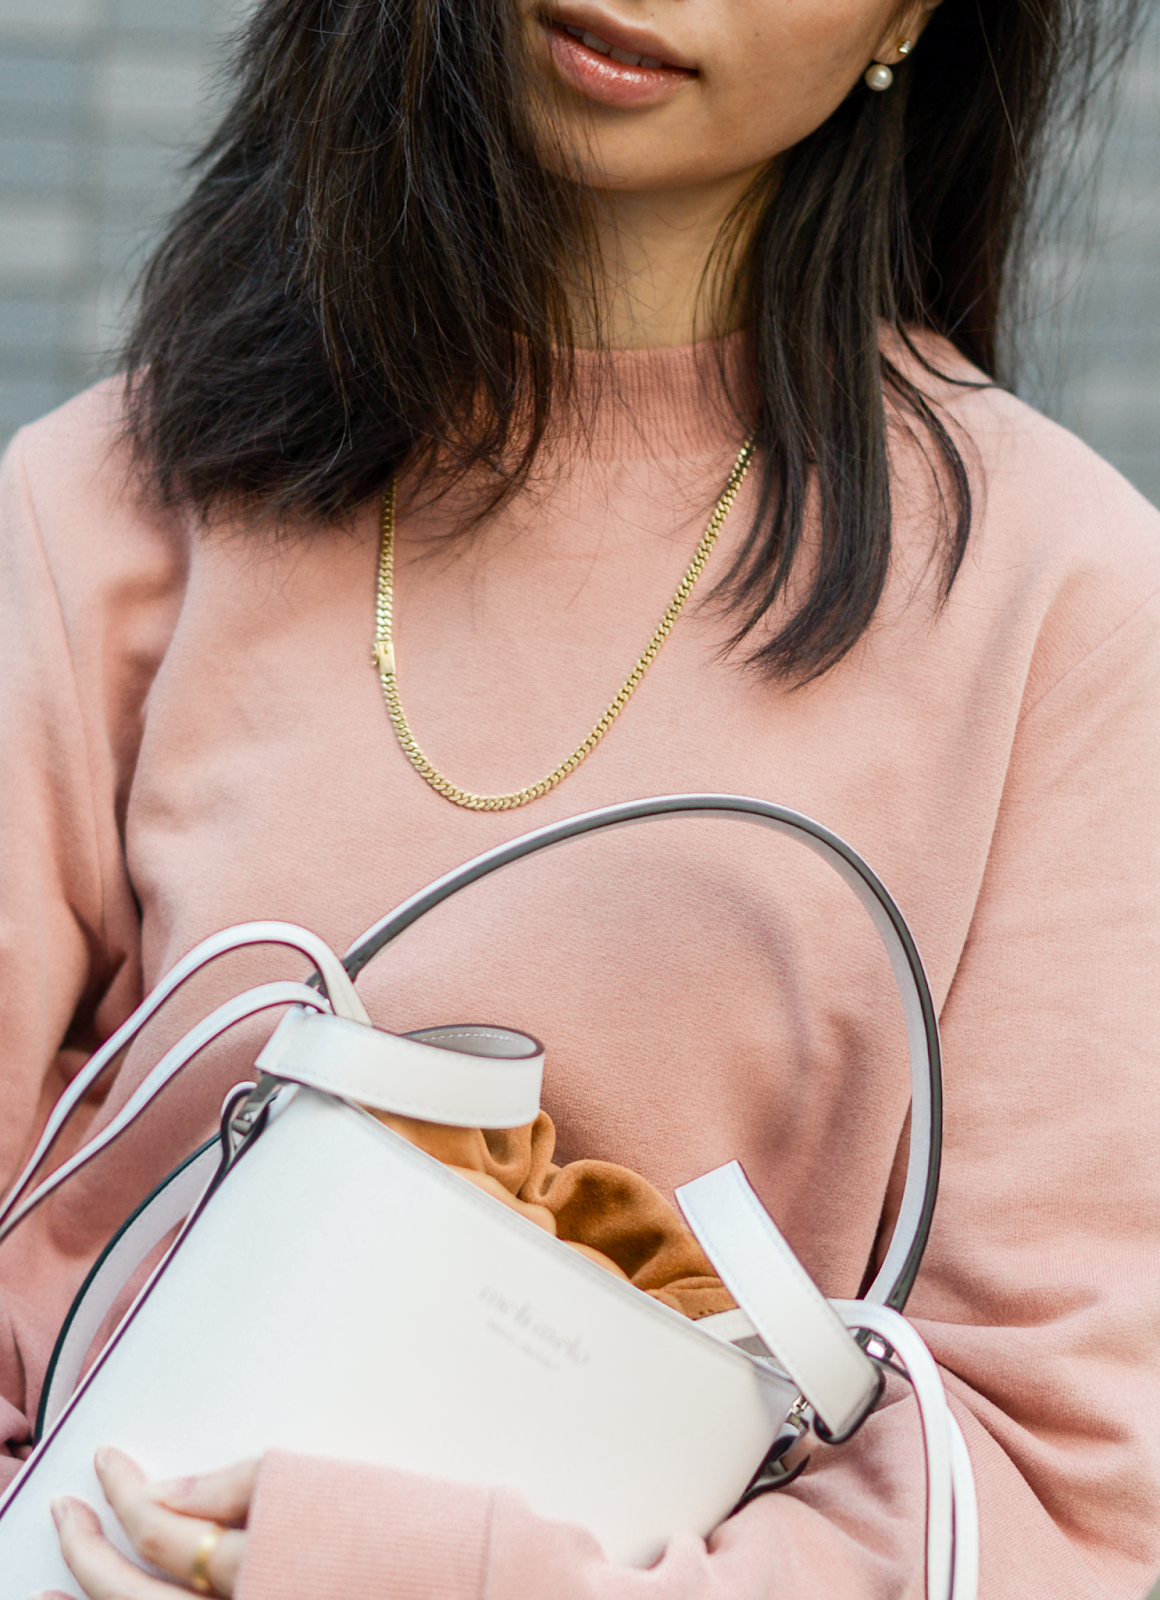 Meli Melo White Bucket Bag, Santina White Bucket Bag Meli Melo, How To Wear A Bucket Bag, Ways To Style A White Bucket Bag, Perfect Weekend Bags / 102018  / FOREVERVANNY